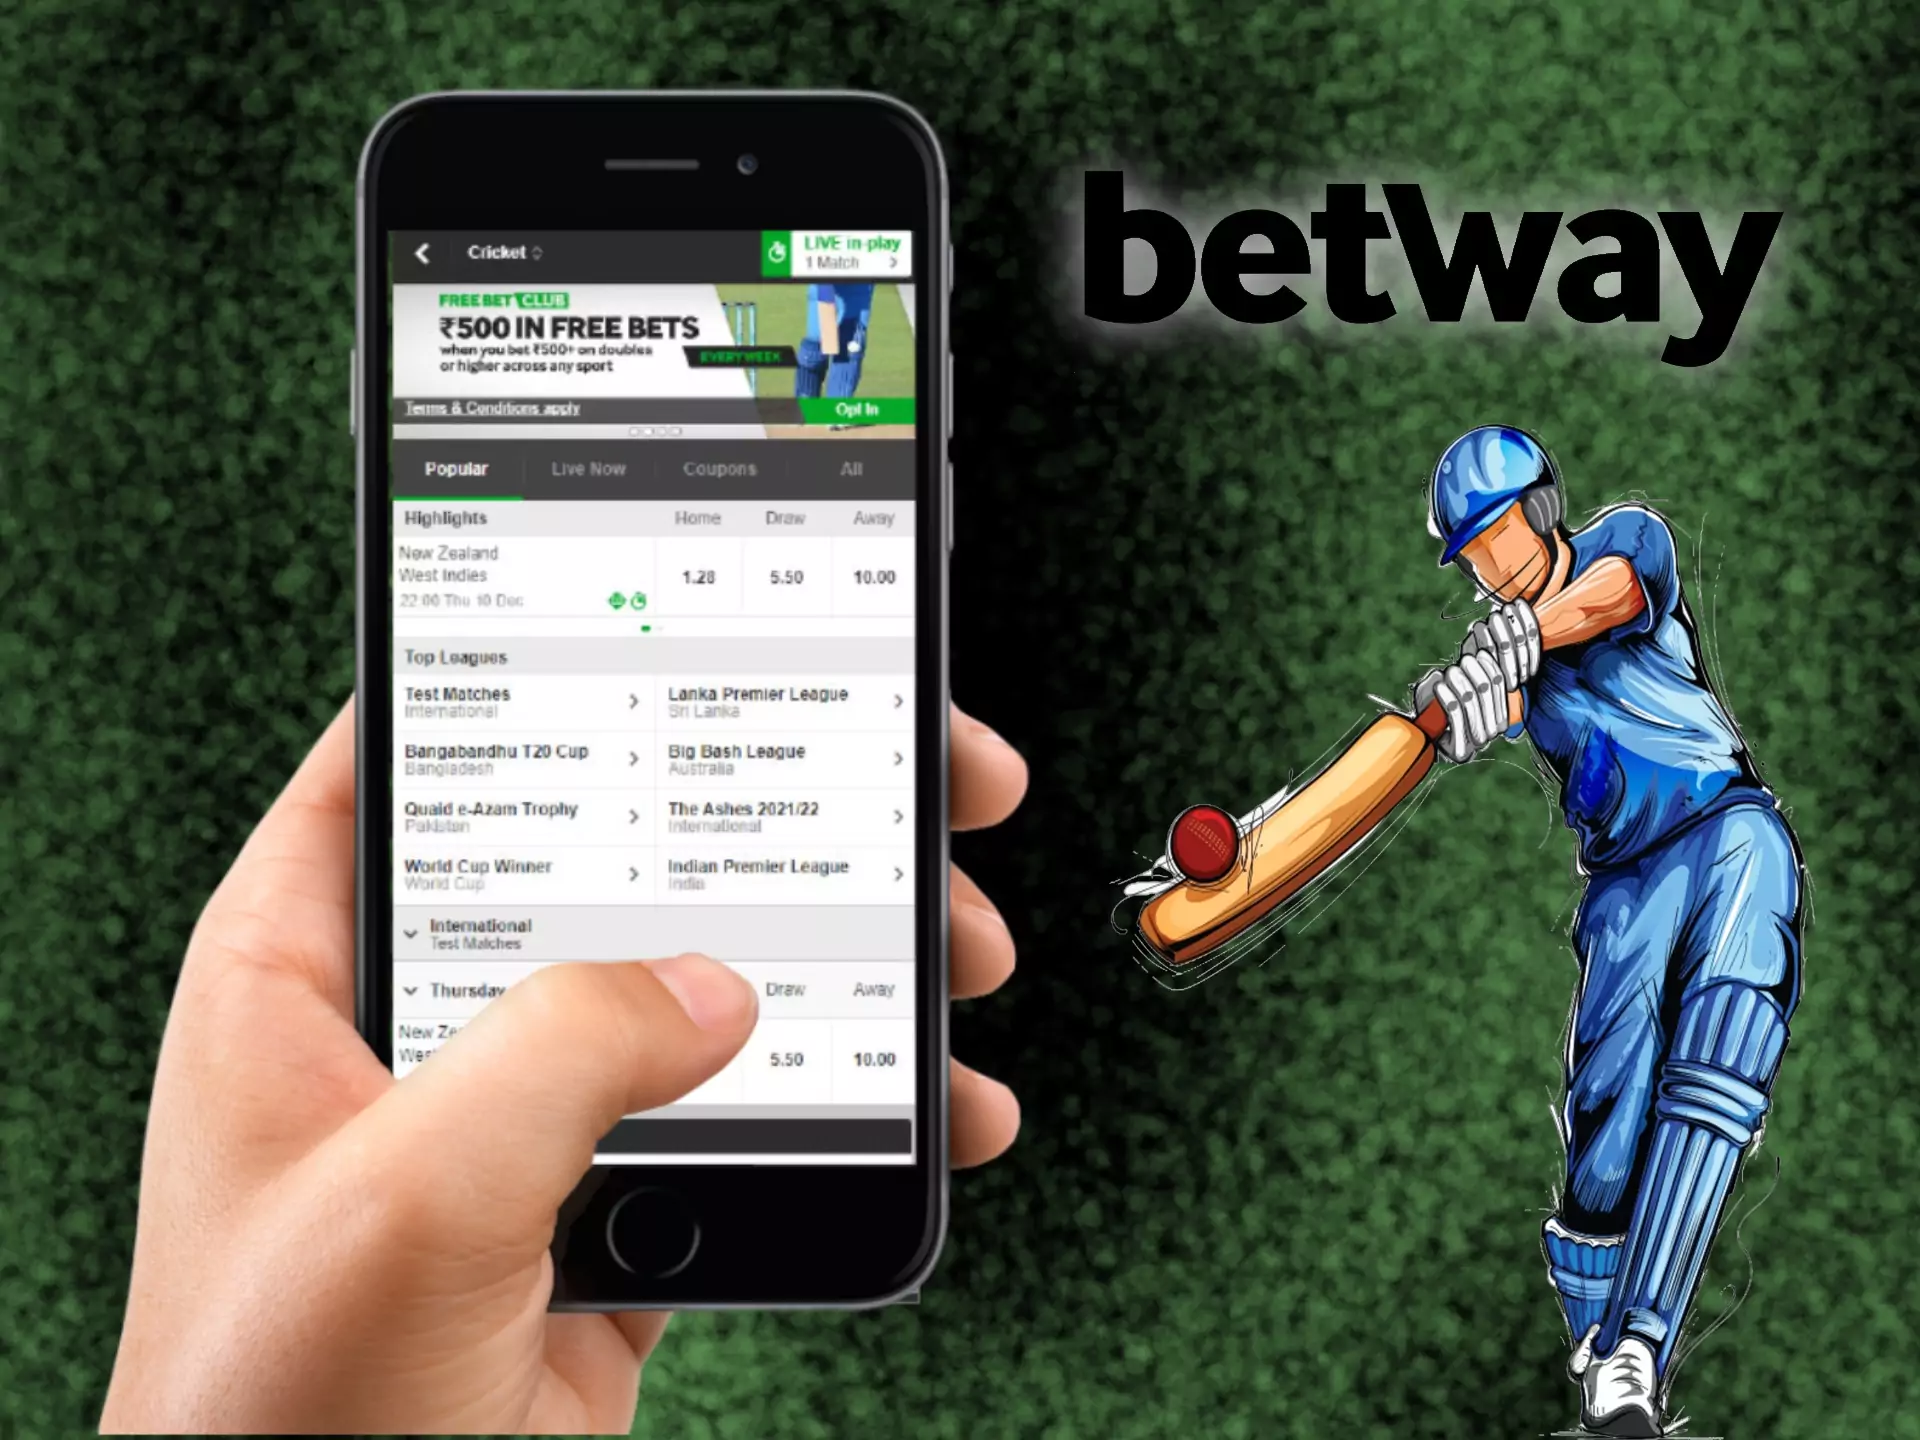 Betting on cricket is more convenient via Betway mobile app.